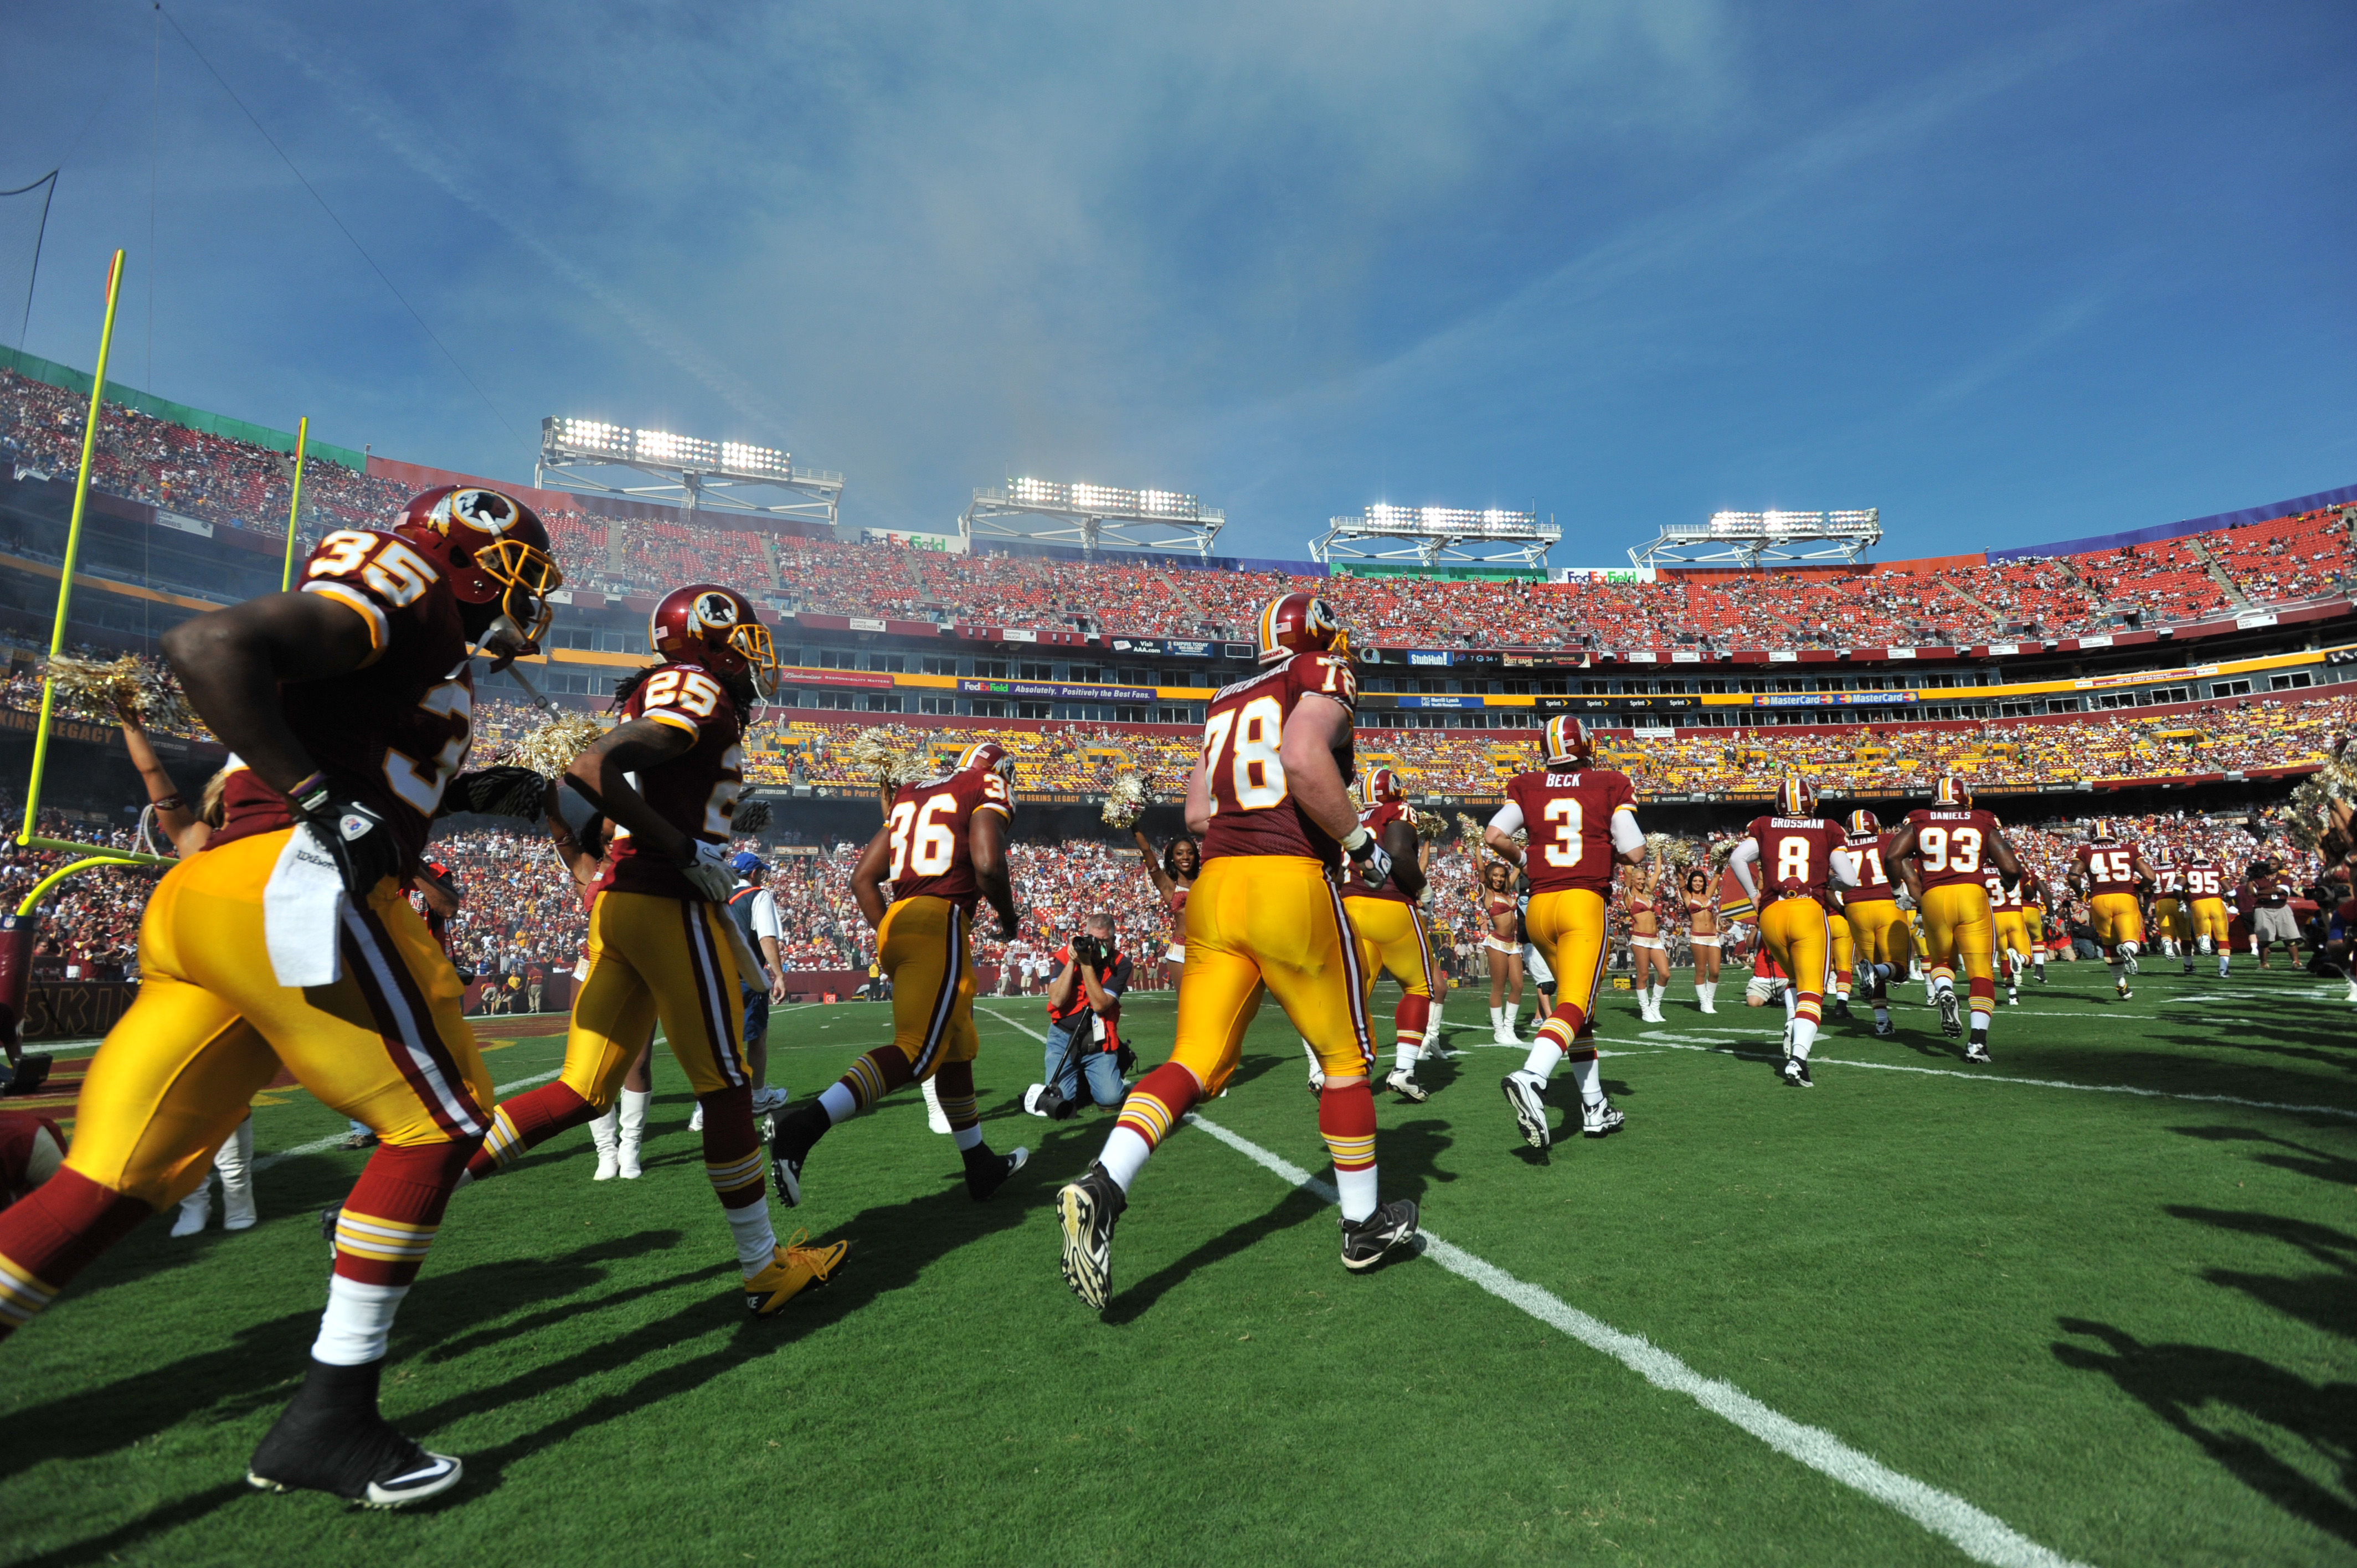 LANDOVER, MD - SEPTEMBER 19:  The Washington Redskins run onto the field before the game against the Houston Texans at FedExField on September 19, 2010 in Landover, Maryland. The Texans defeated the Redskins in overtime 30-27. (Photo by Larry French/Getty